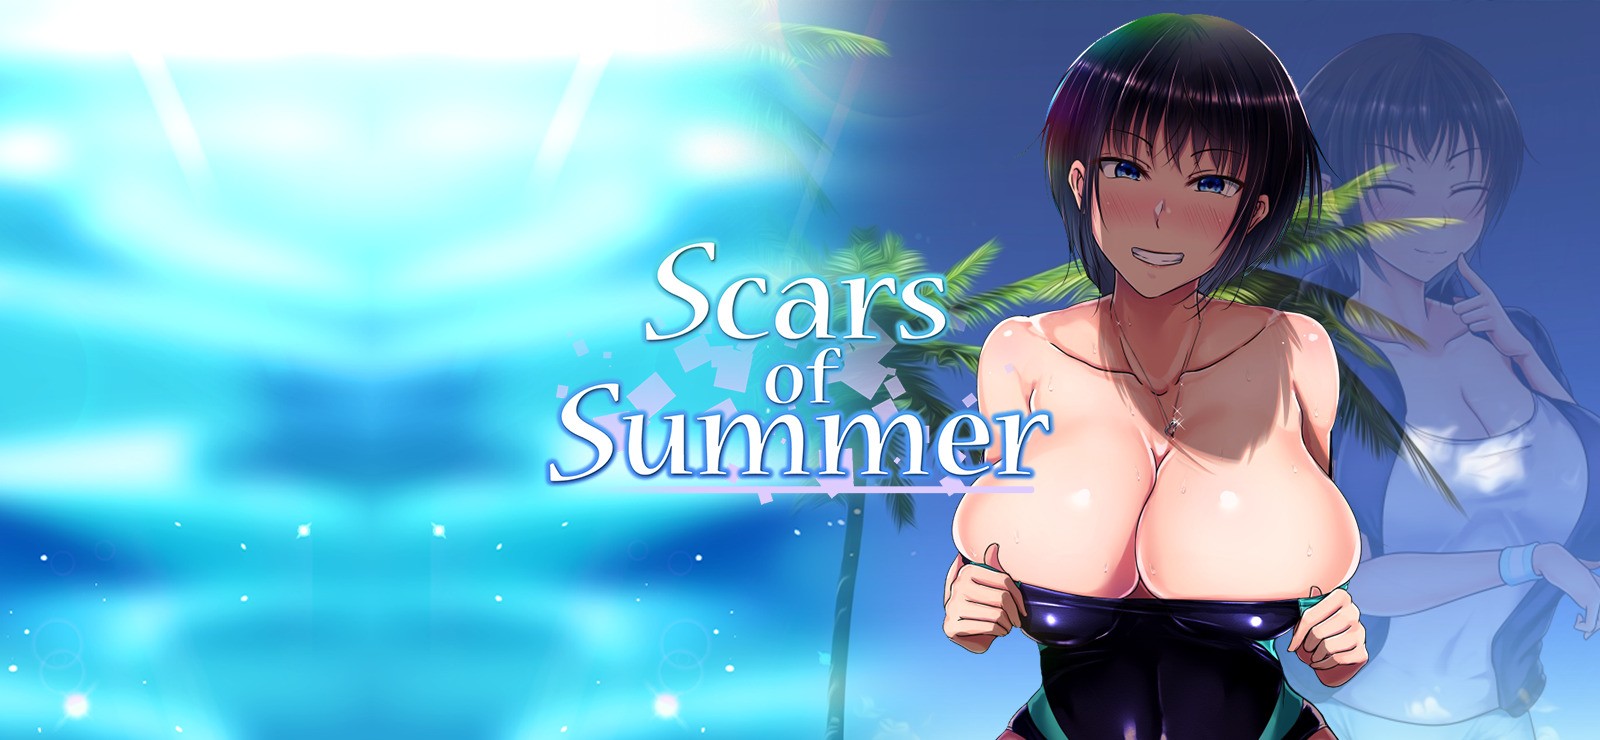 Scars Of Summer Adult Game Android Apk Download (7)